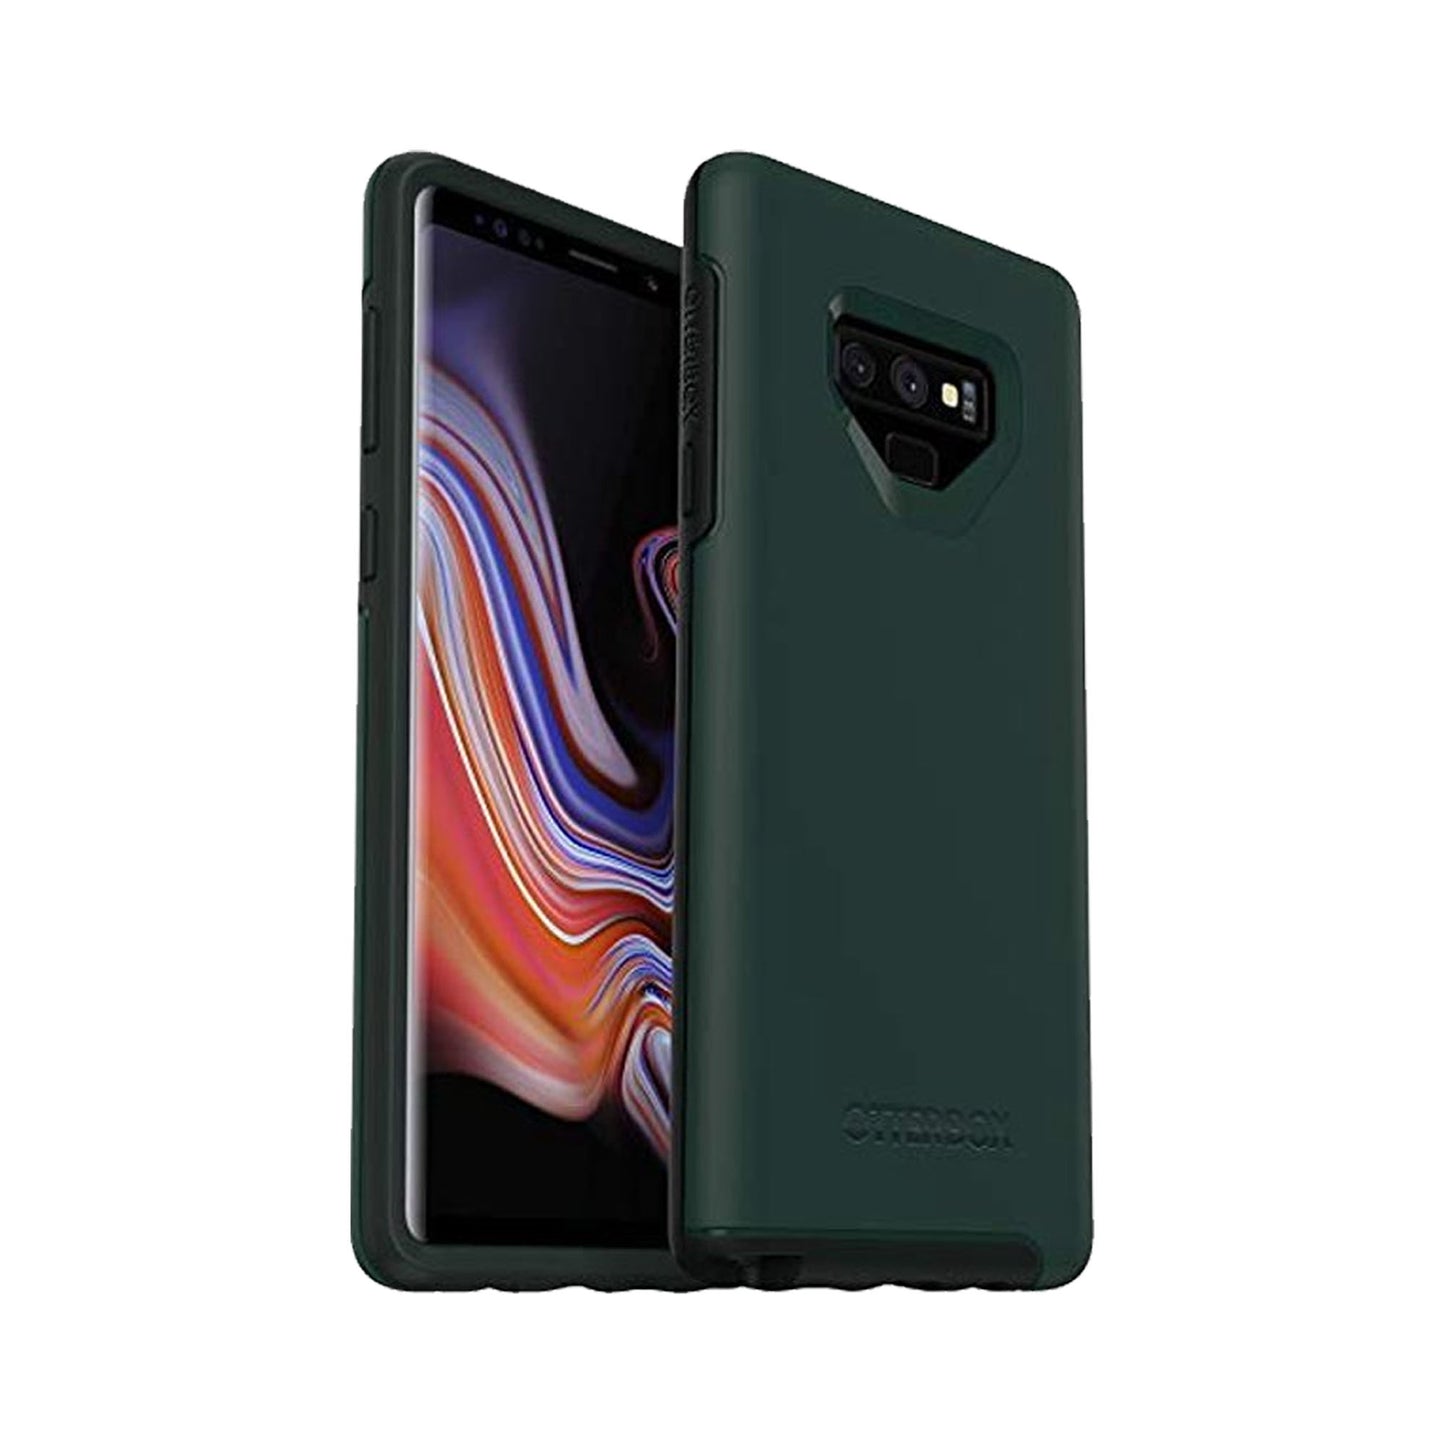 Otterbox Symmetry Case for Samsung Galaxy Note 9 - Ivy Meadow (Barcode: 660543462880 )